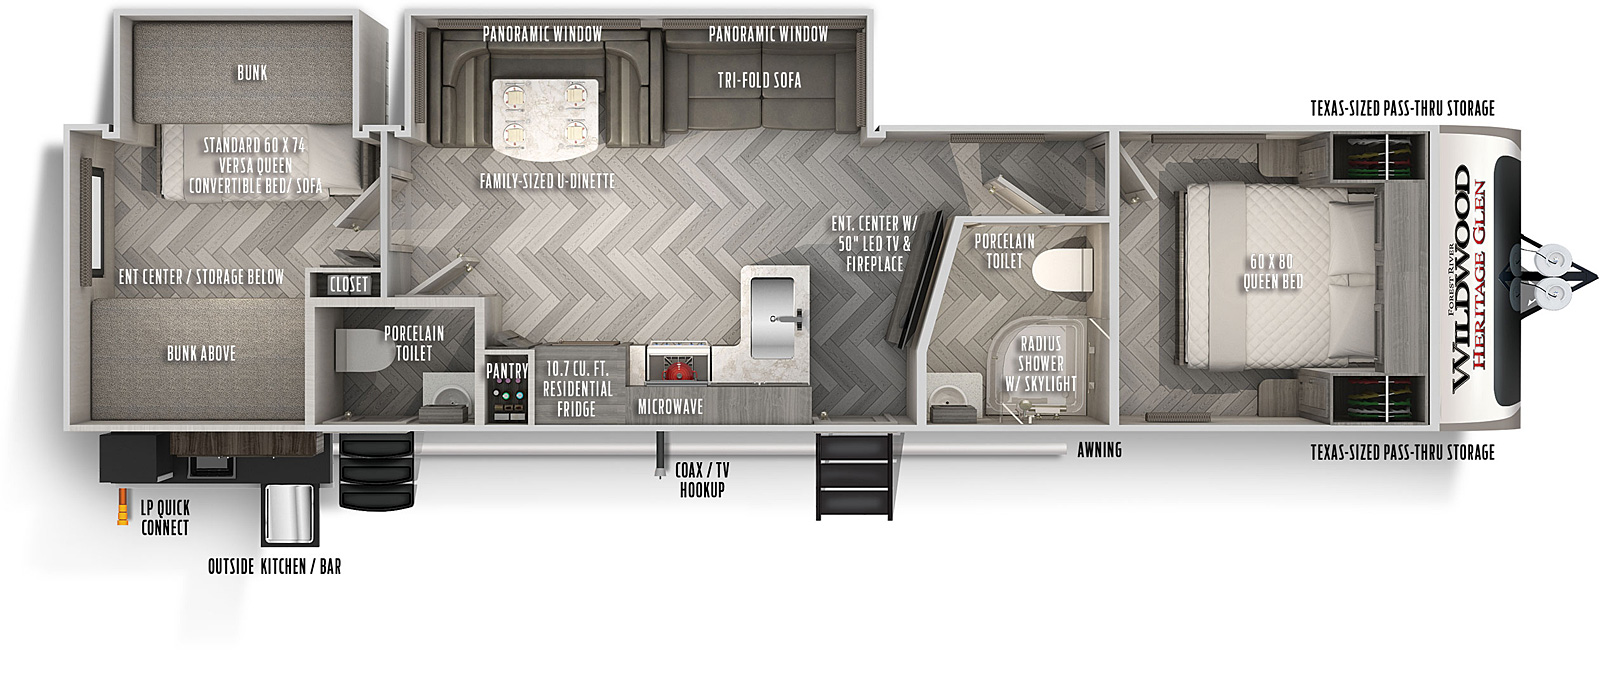 Heritage Glen 314BUD floorplan. The 314BUD has 2 slide outs and two plus entry doors.